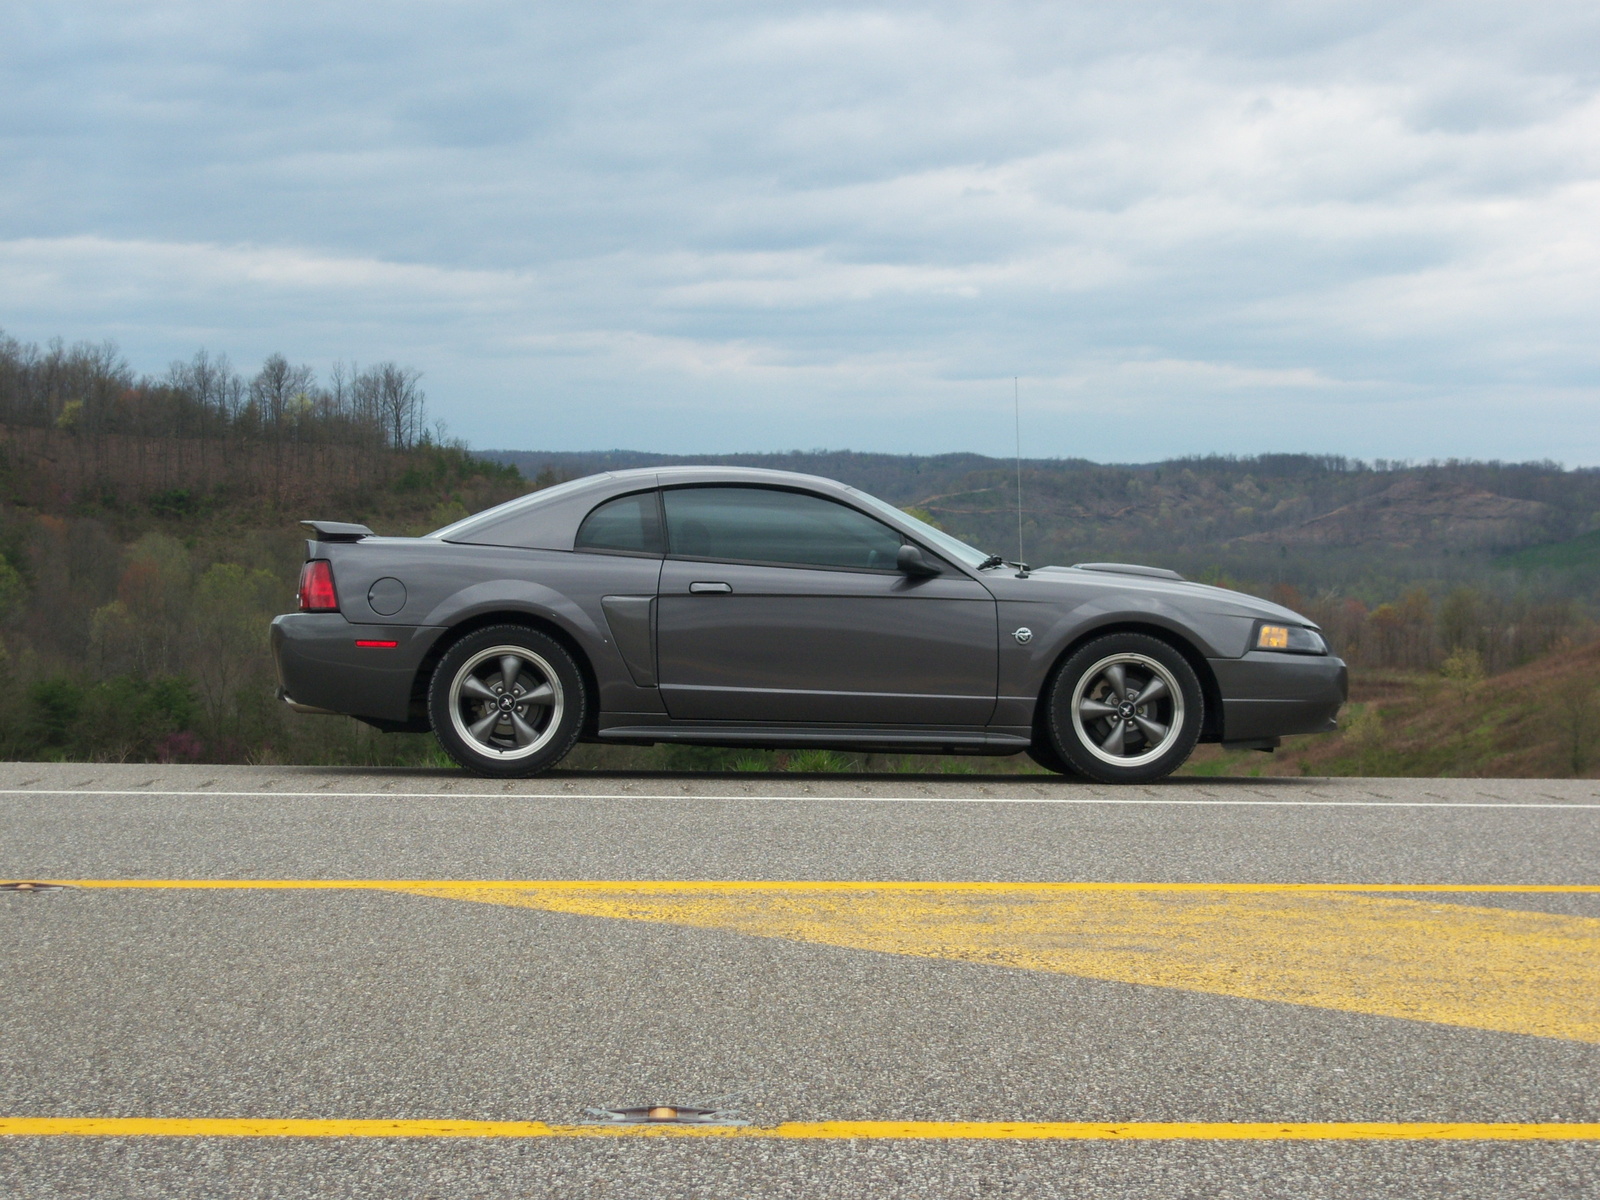 2004 Ford mustang gt premium review #5